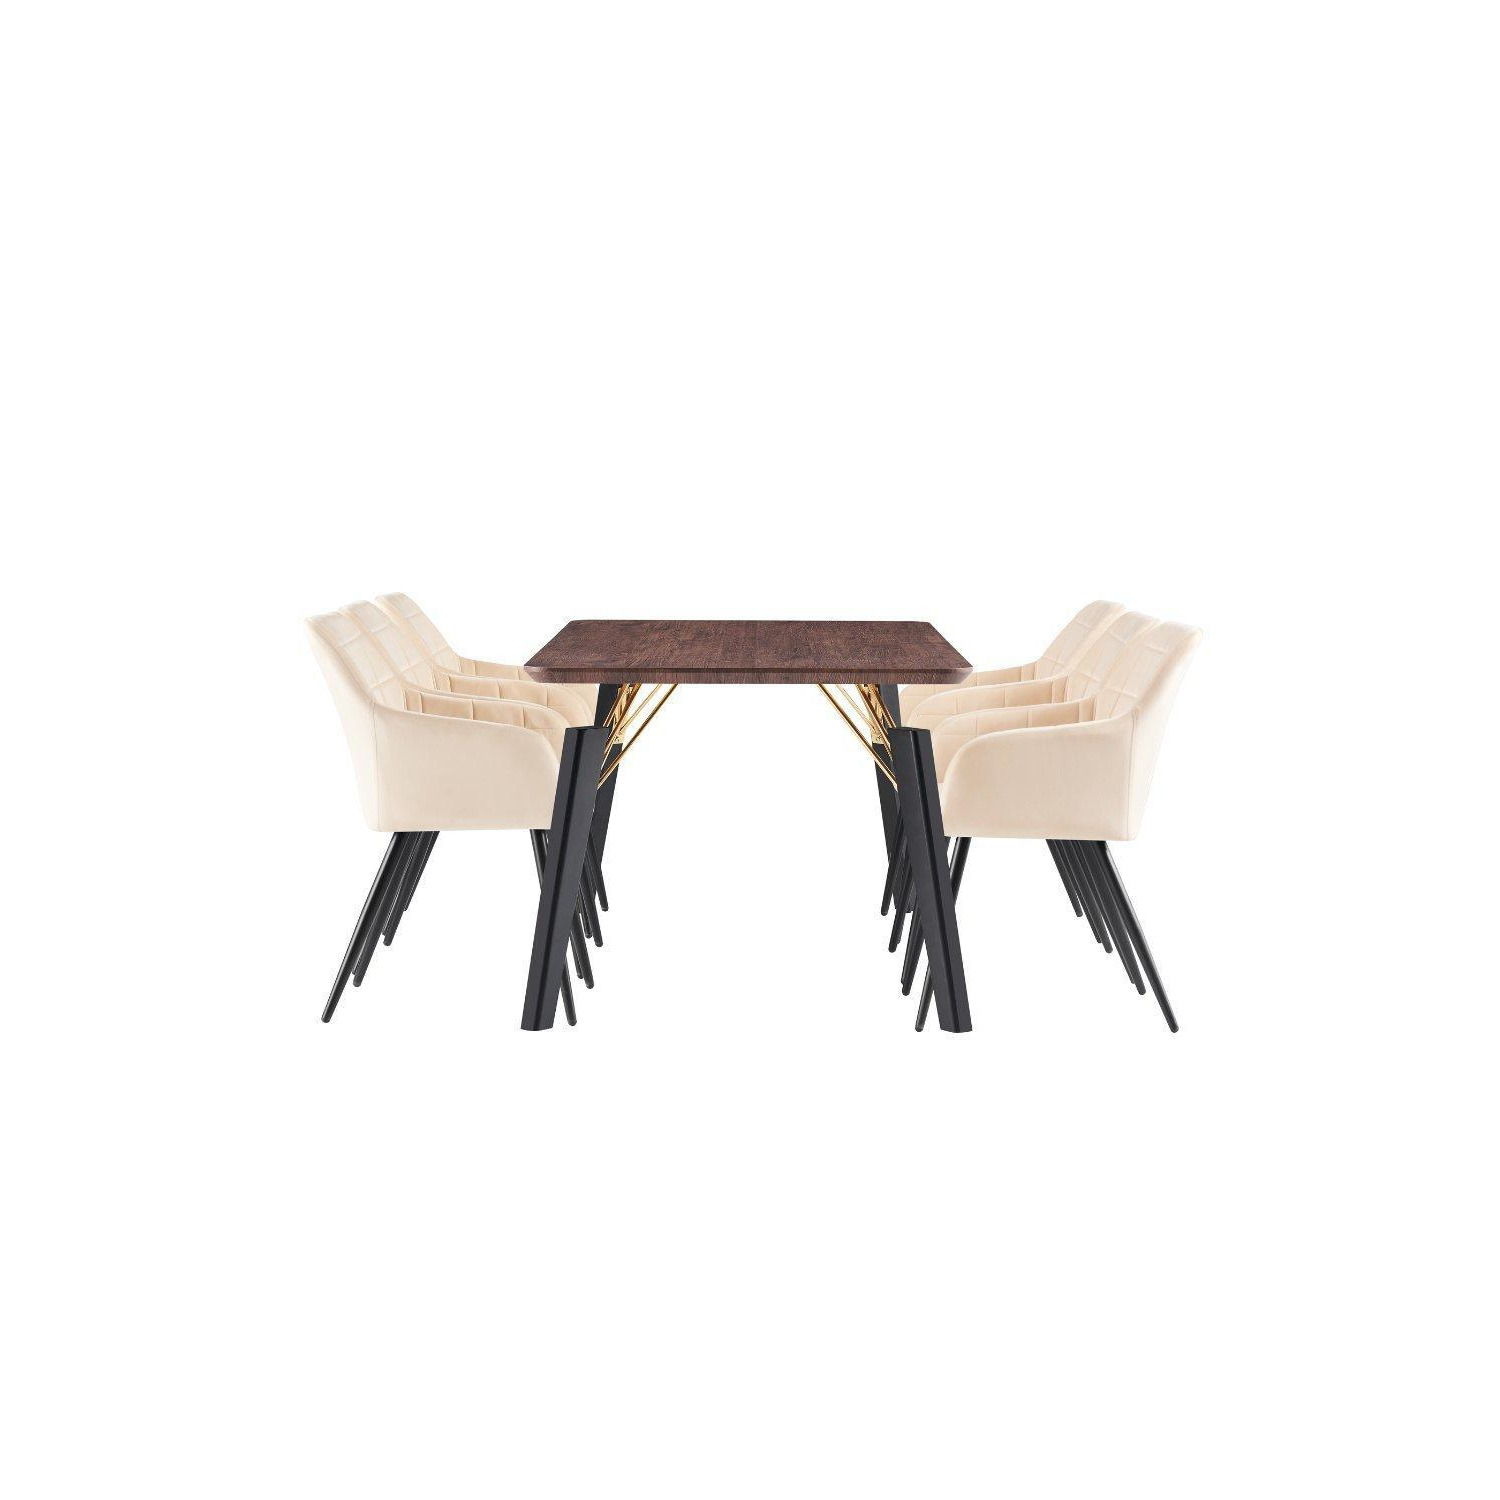 'Camden Cosmo' LUX Dining Set a Table and Chairs Set of 6 - image 1